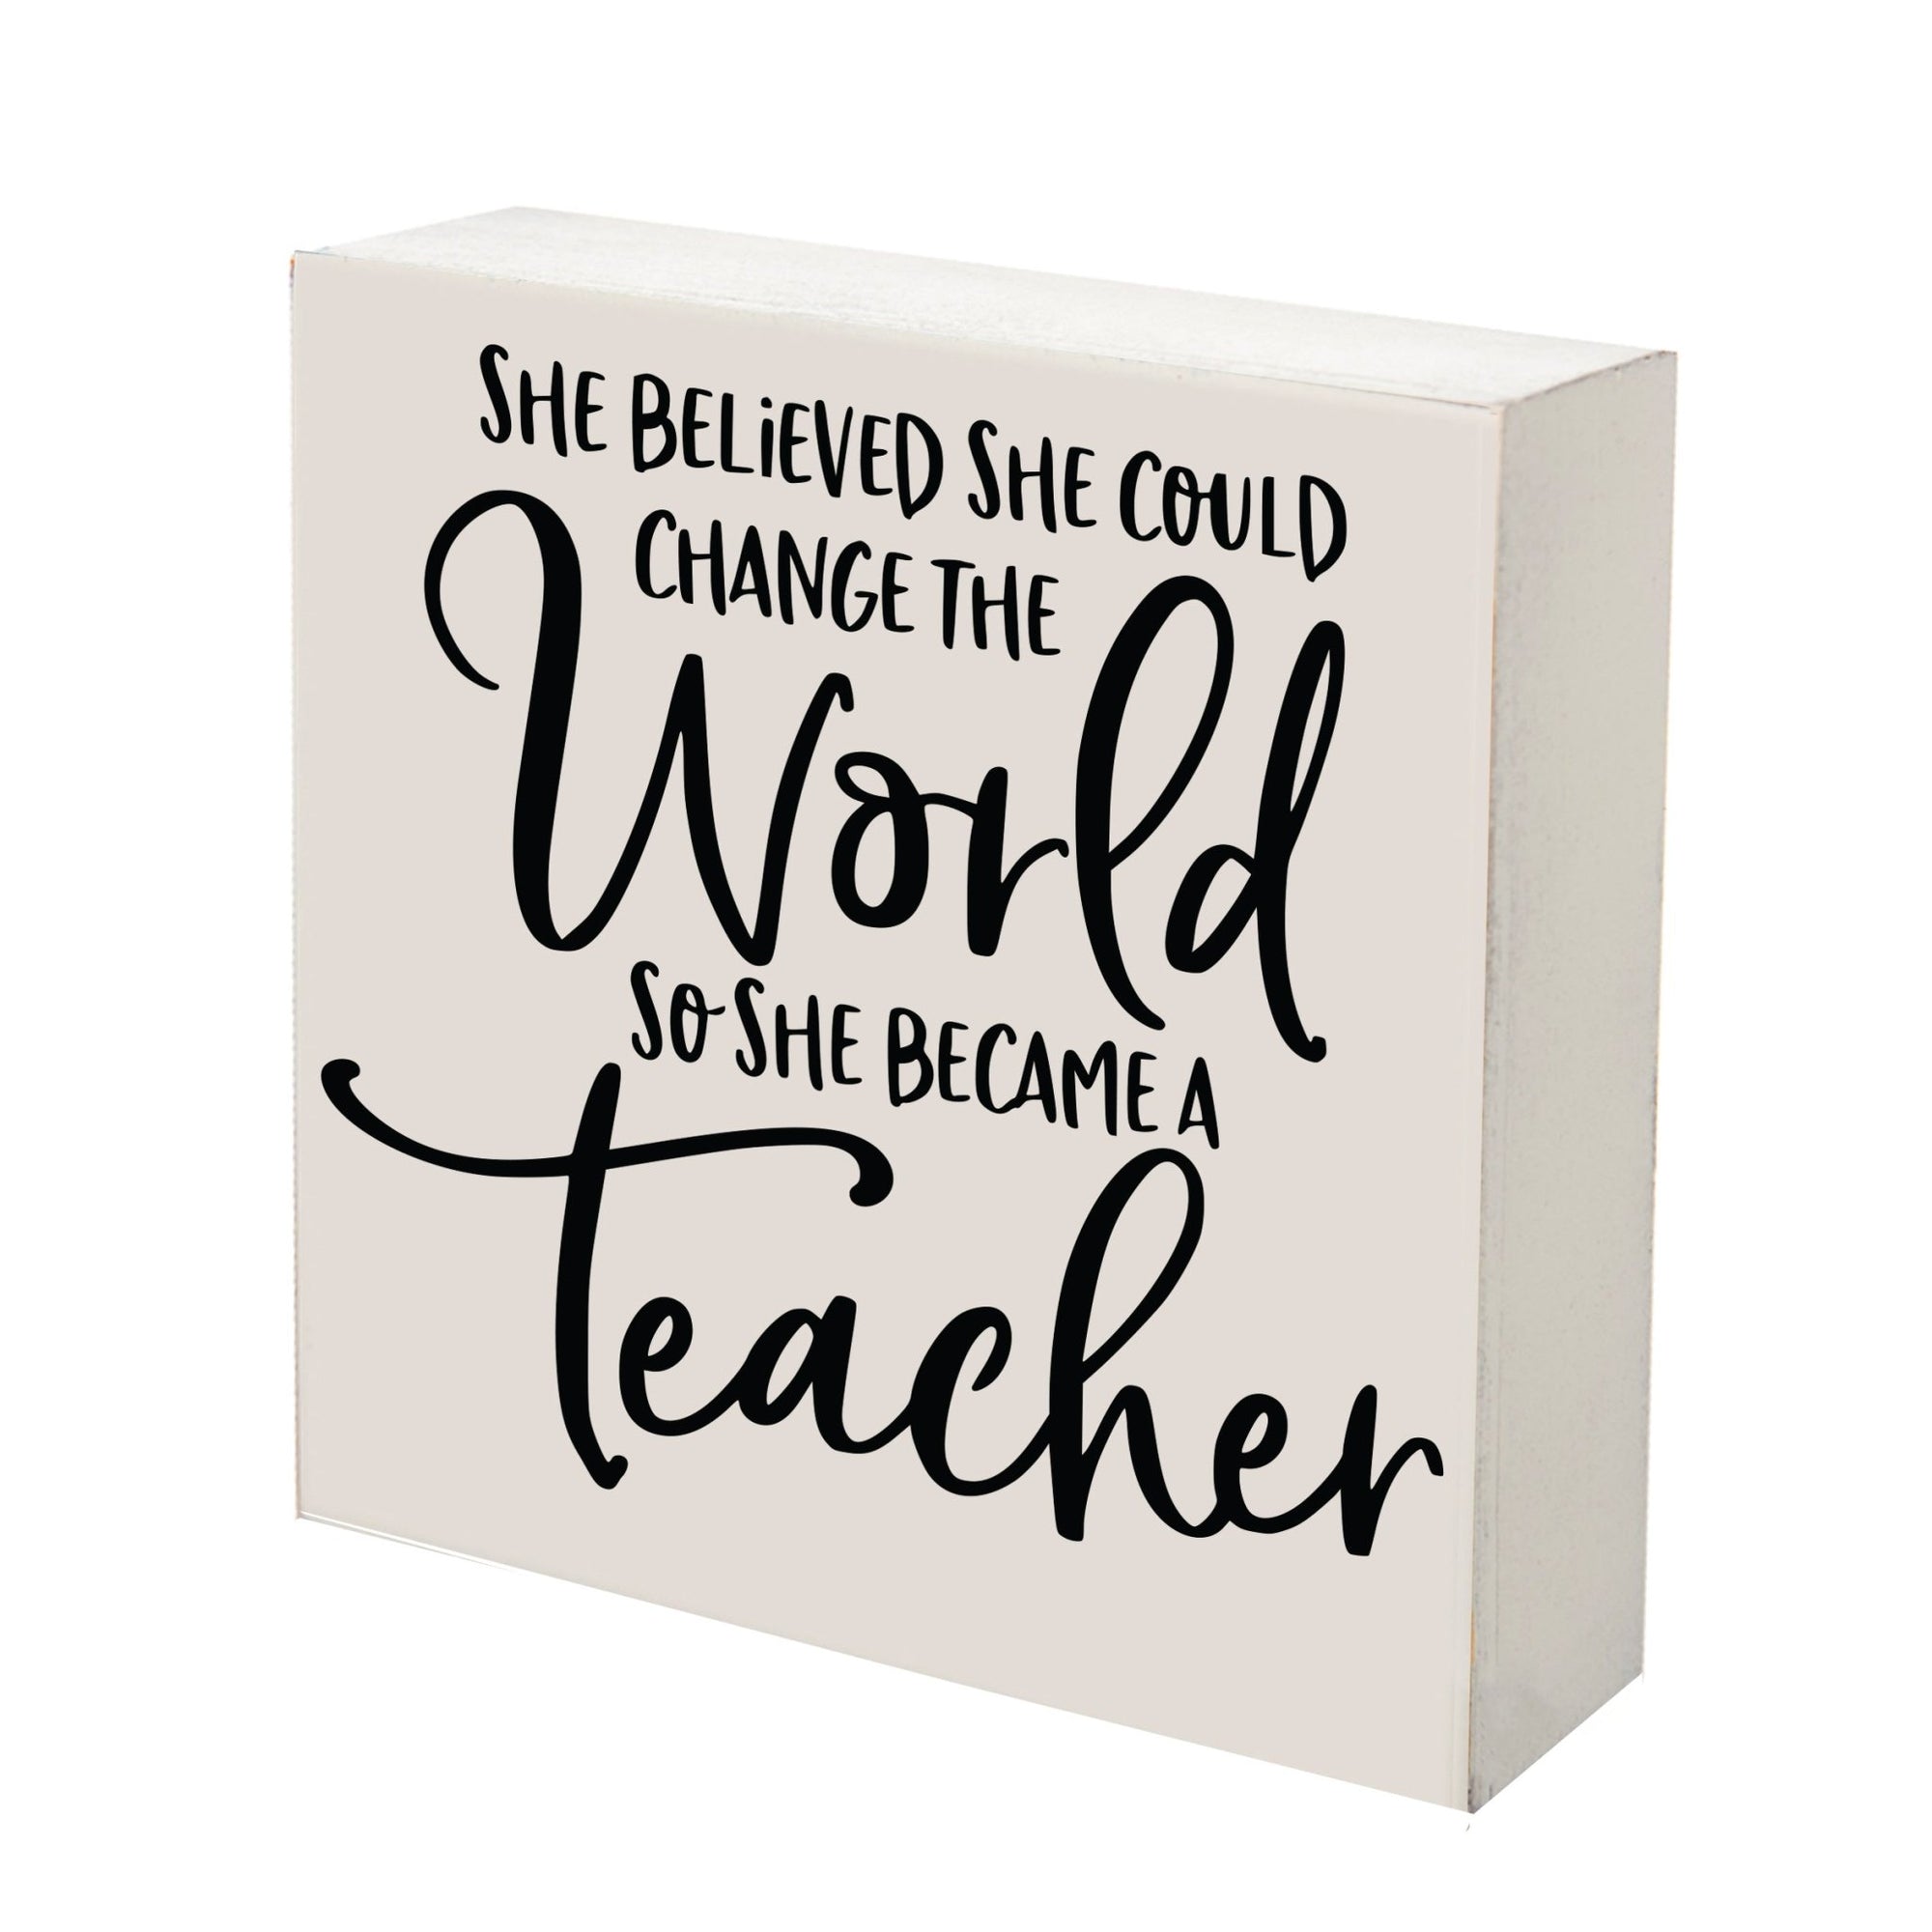 Modern Inspirational Shadow Box for Everyday Home Decorations For Teachers 6x6 - She Believed She Could Change - LifeSong Milestones